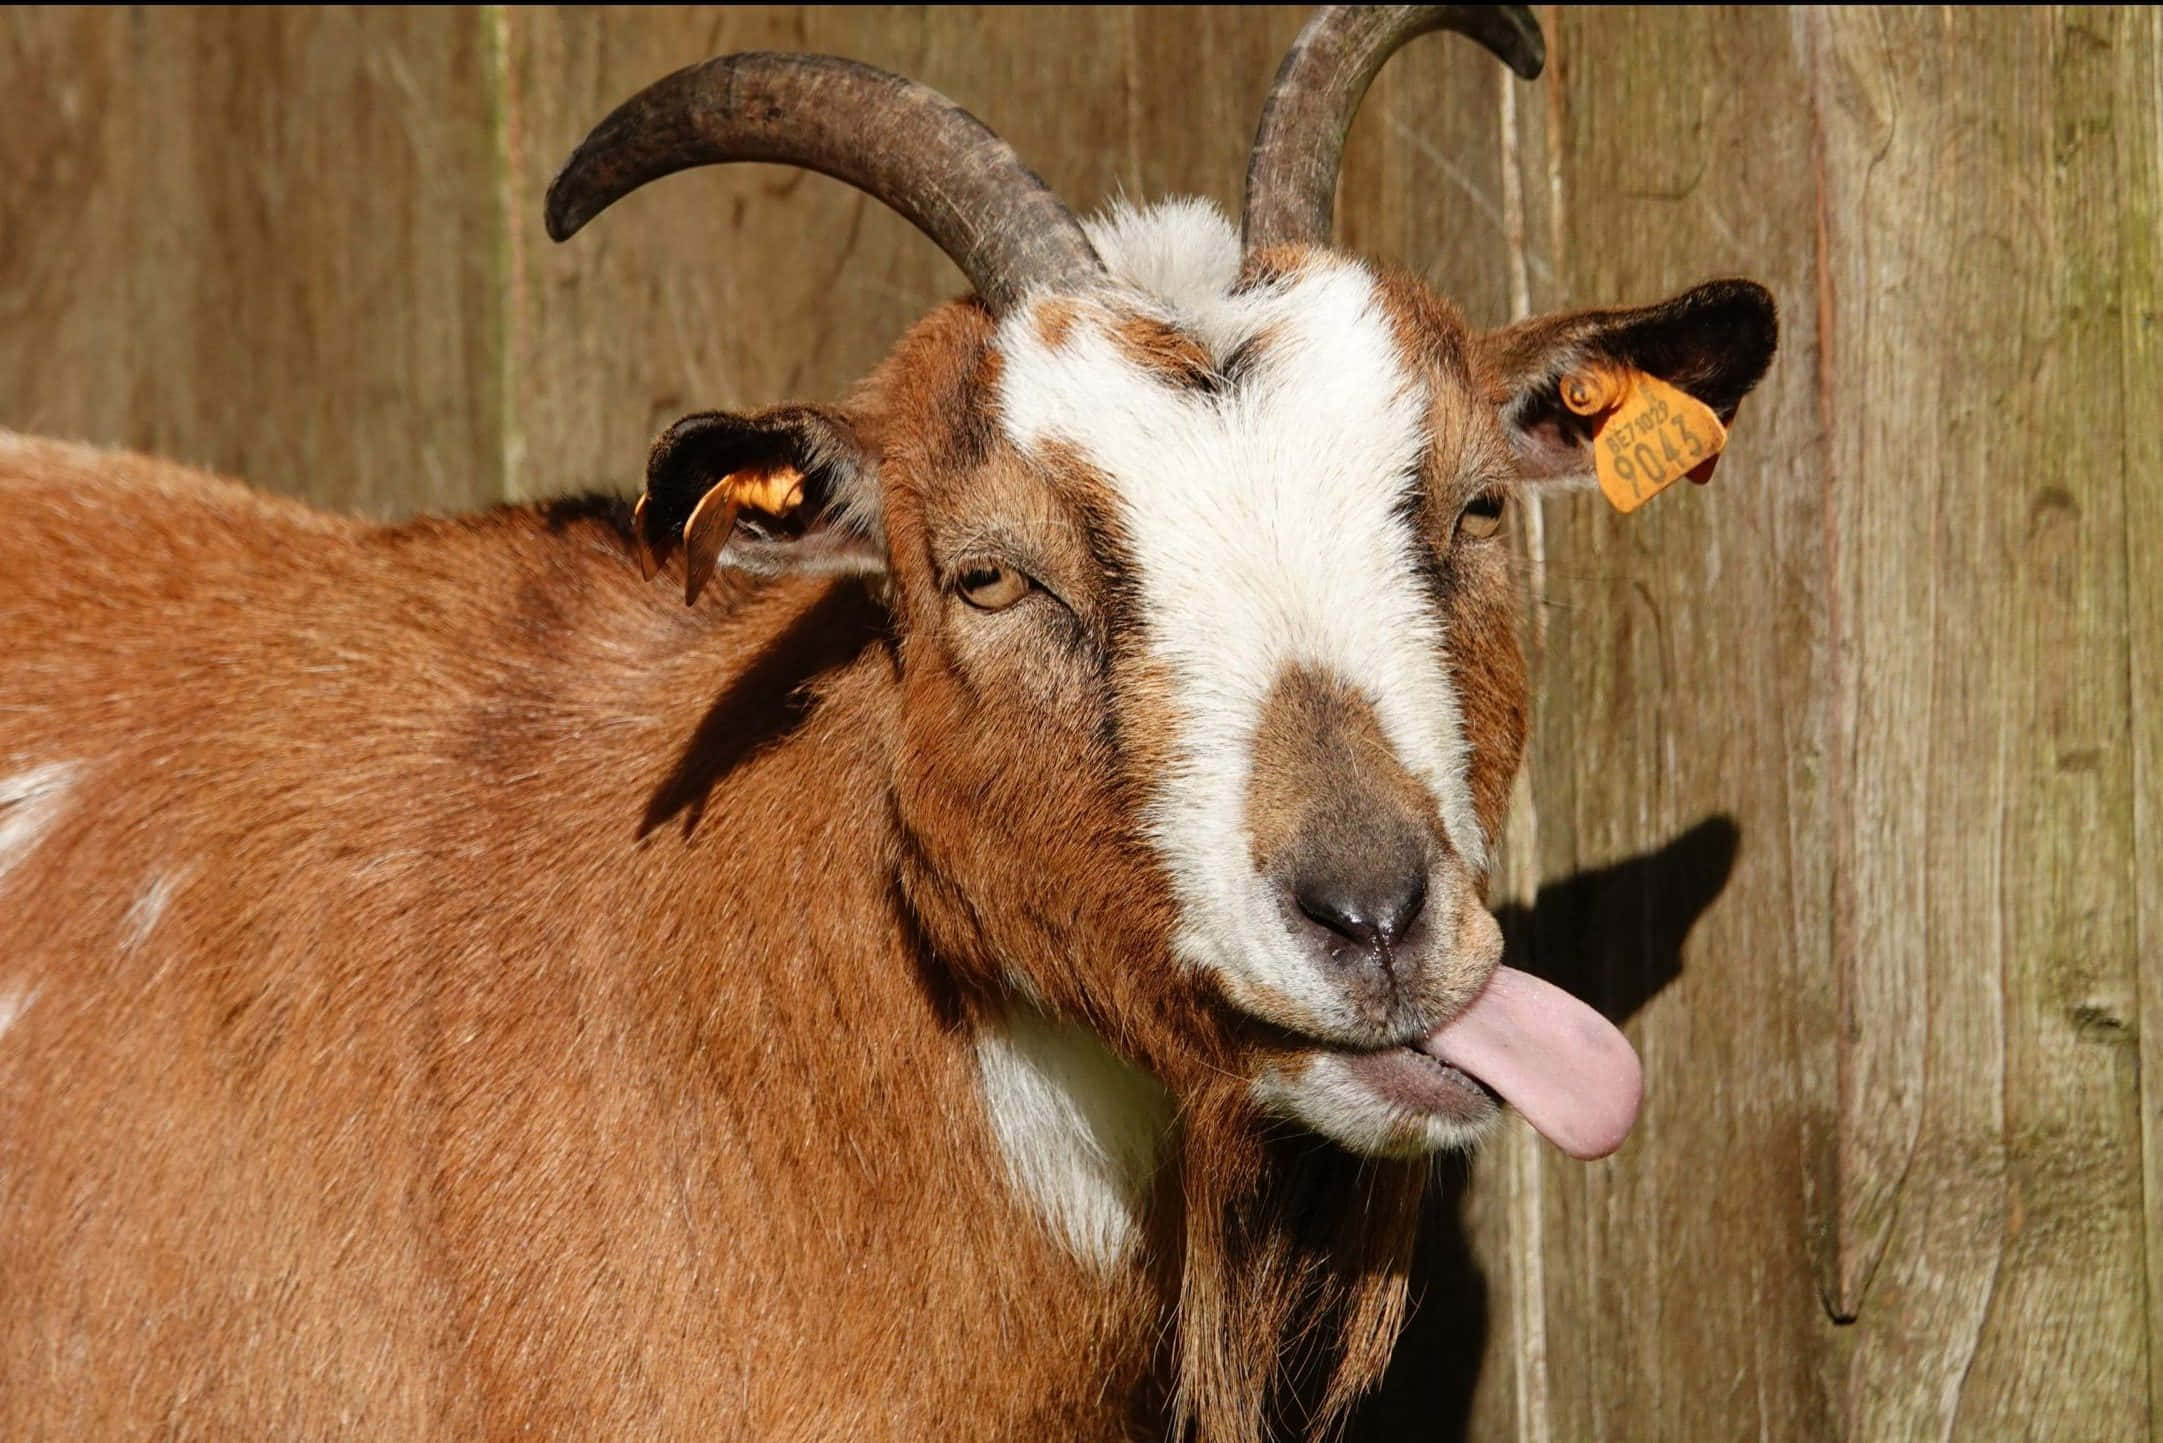 Caption: Delighted Goat Enjoying His Green Feast